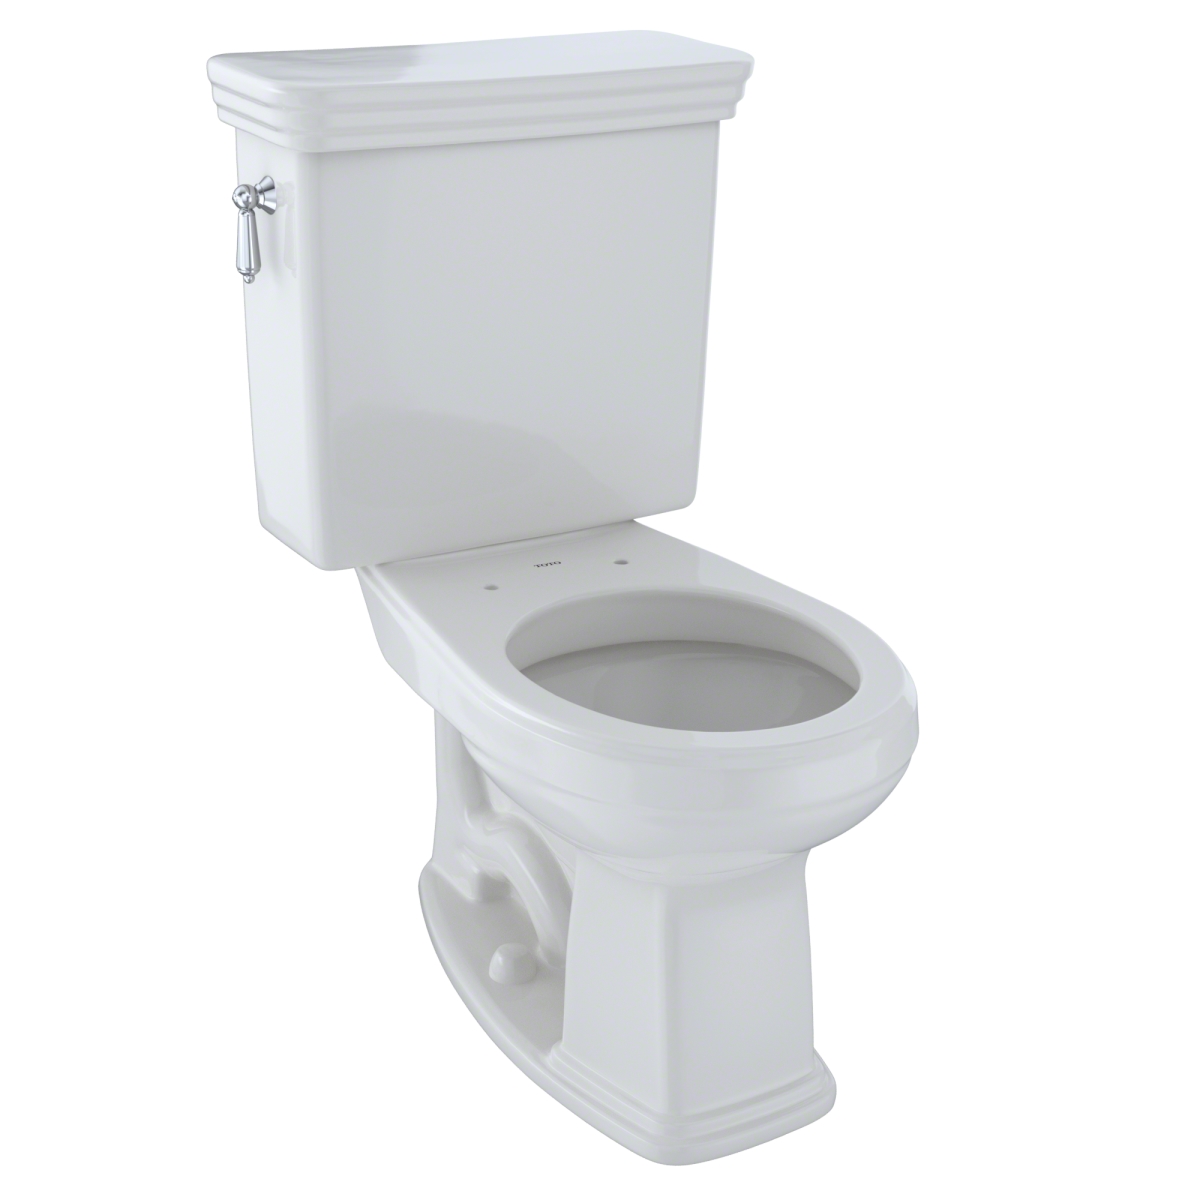 Cst423sf No.11 Promenade Round 1.6 Gpf Universal Height Toilet, Colonial White - 2 Piece